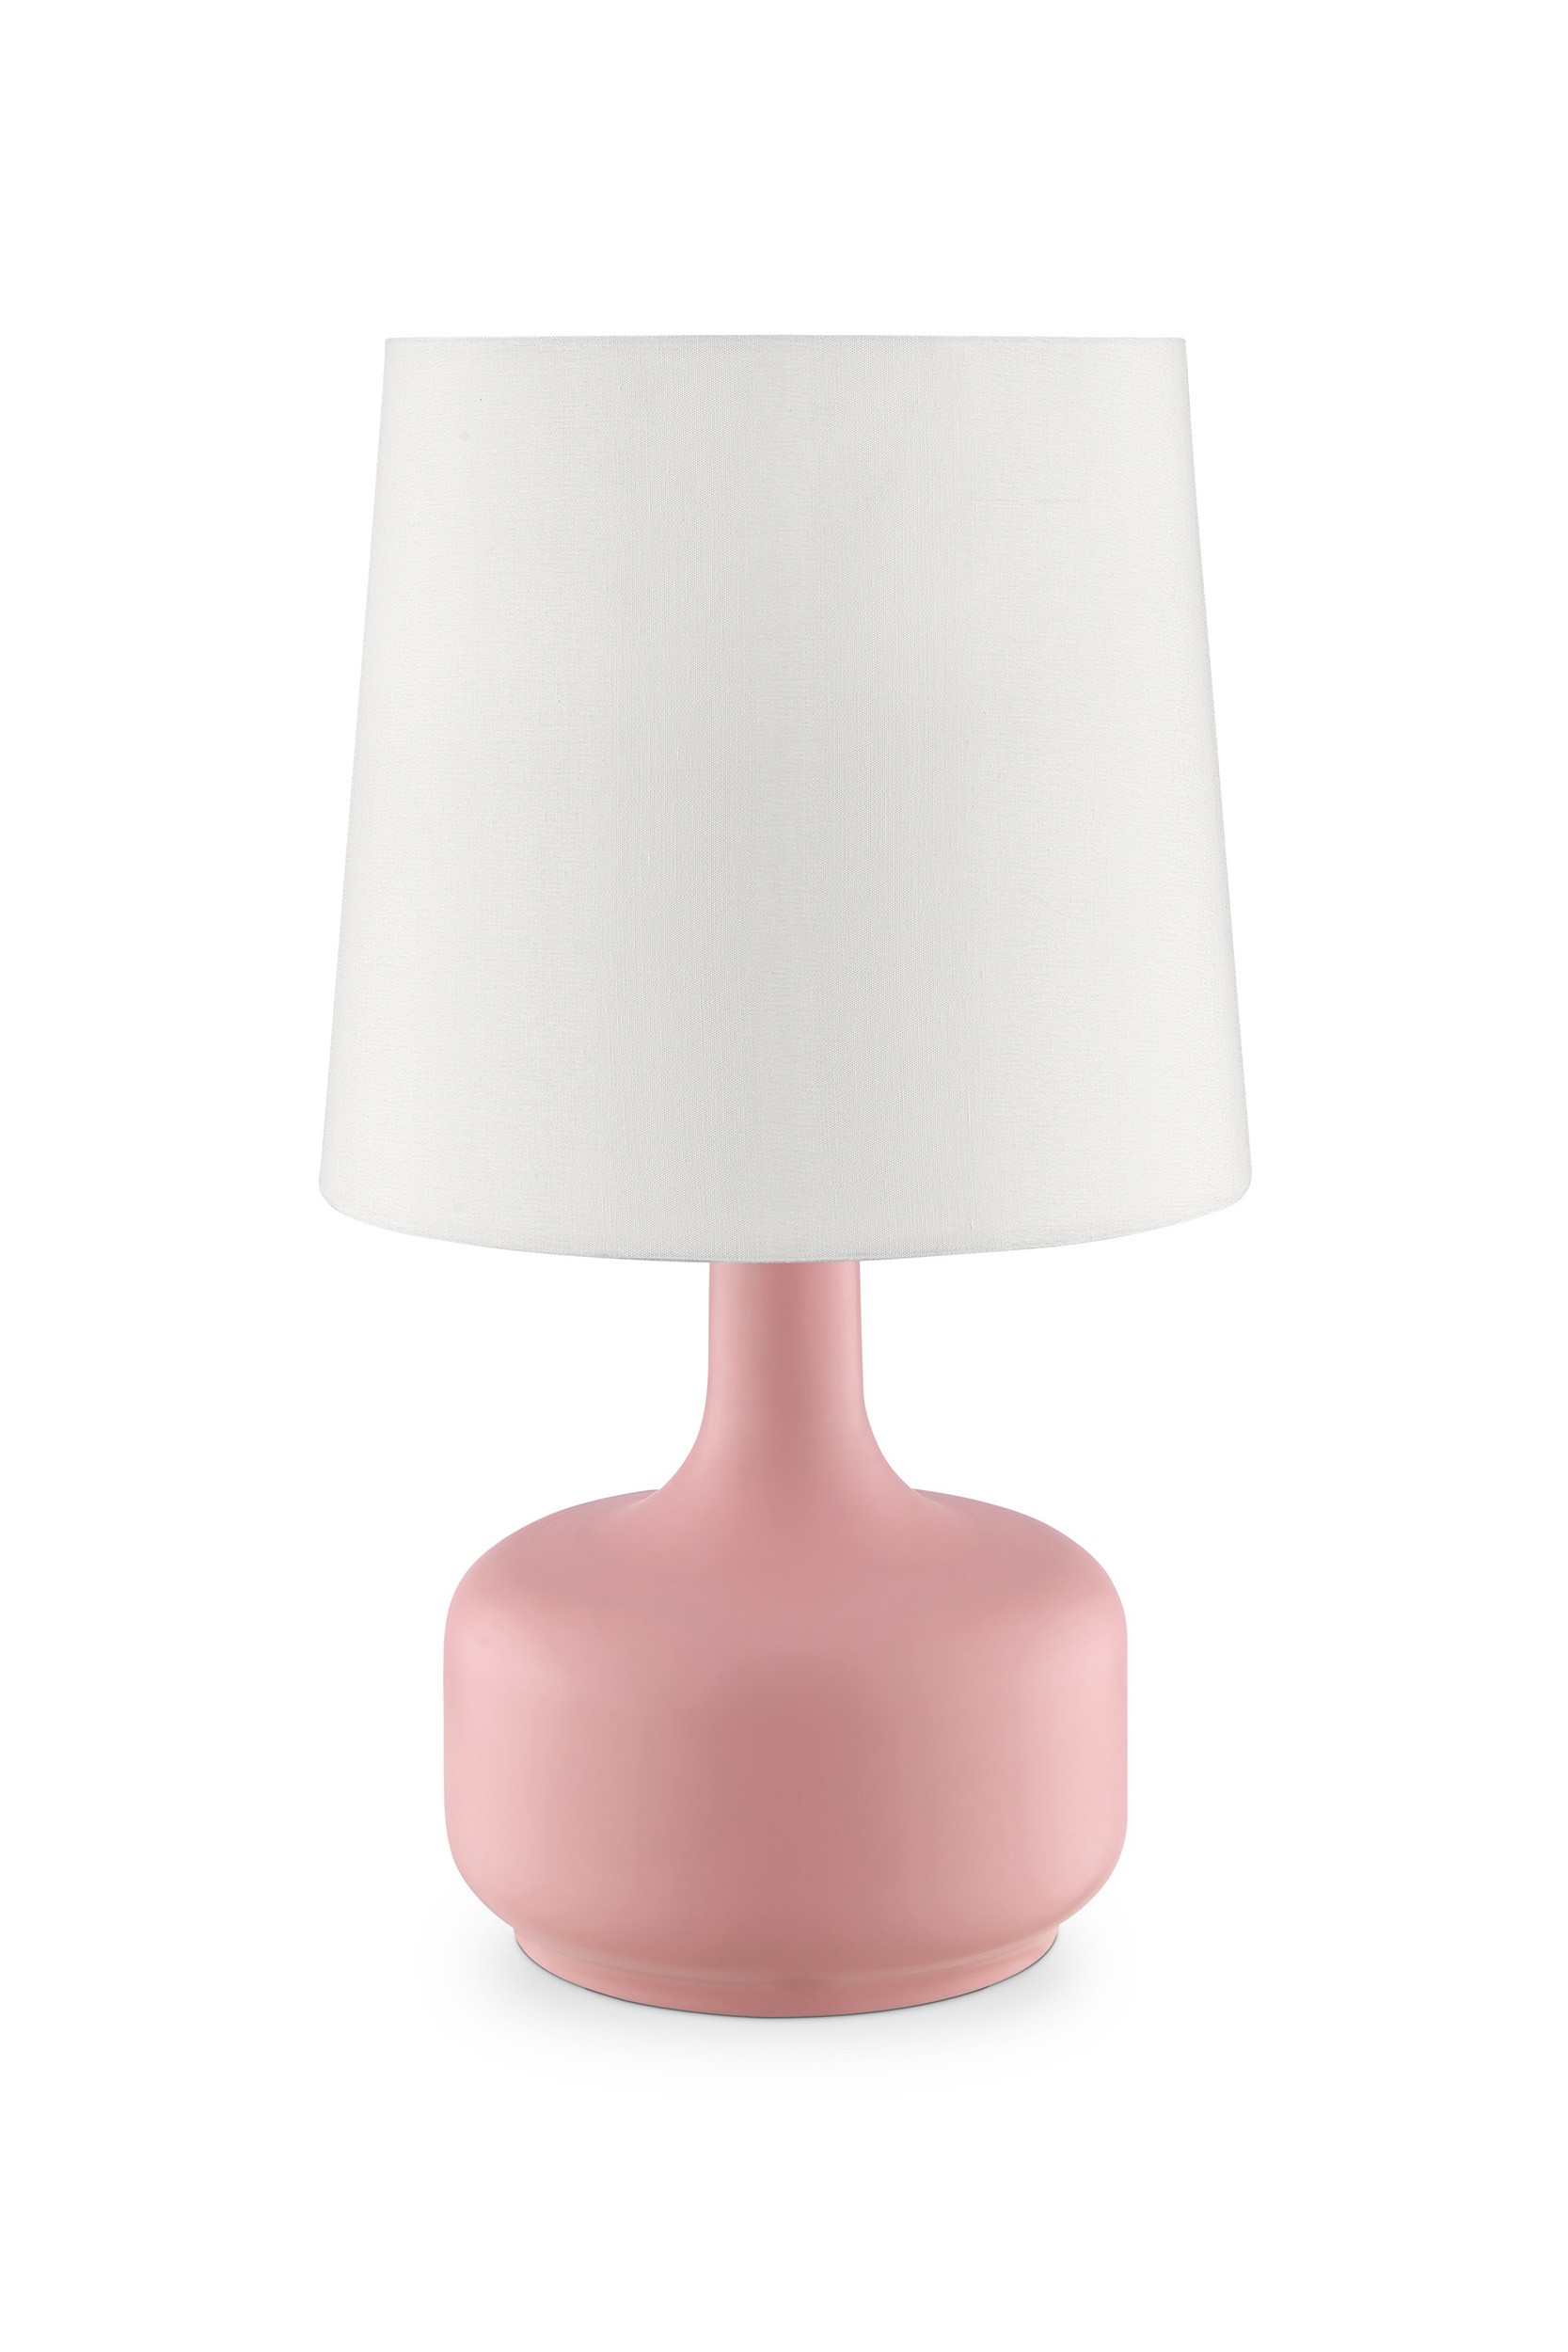 17" Pink Metal Bedside Table Lamp With White Shade-468690-1